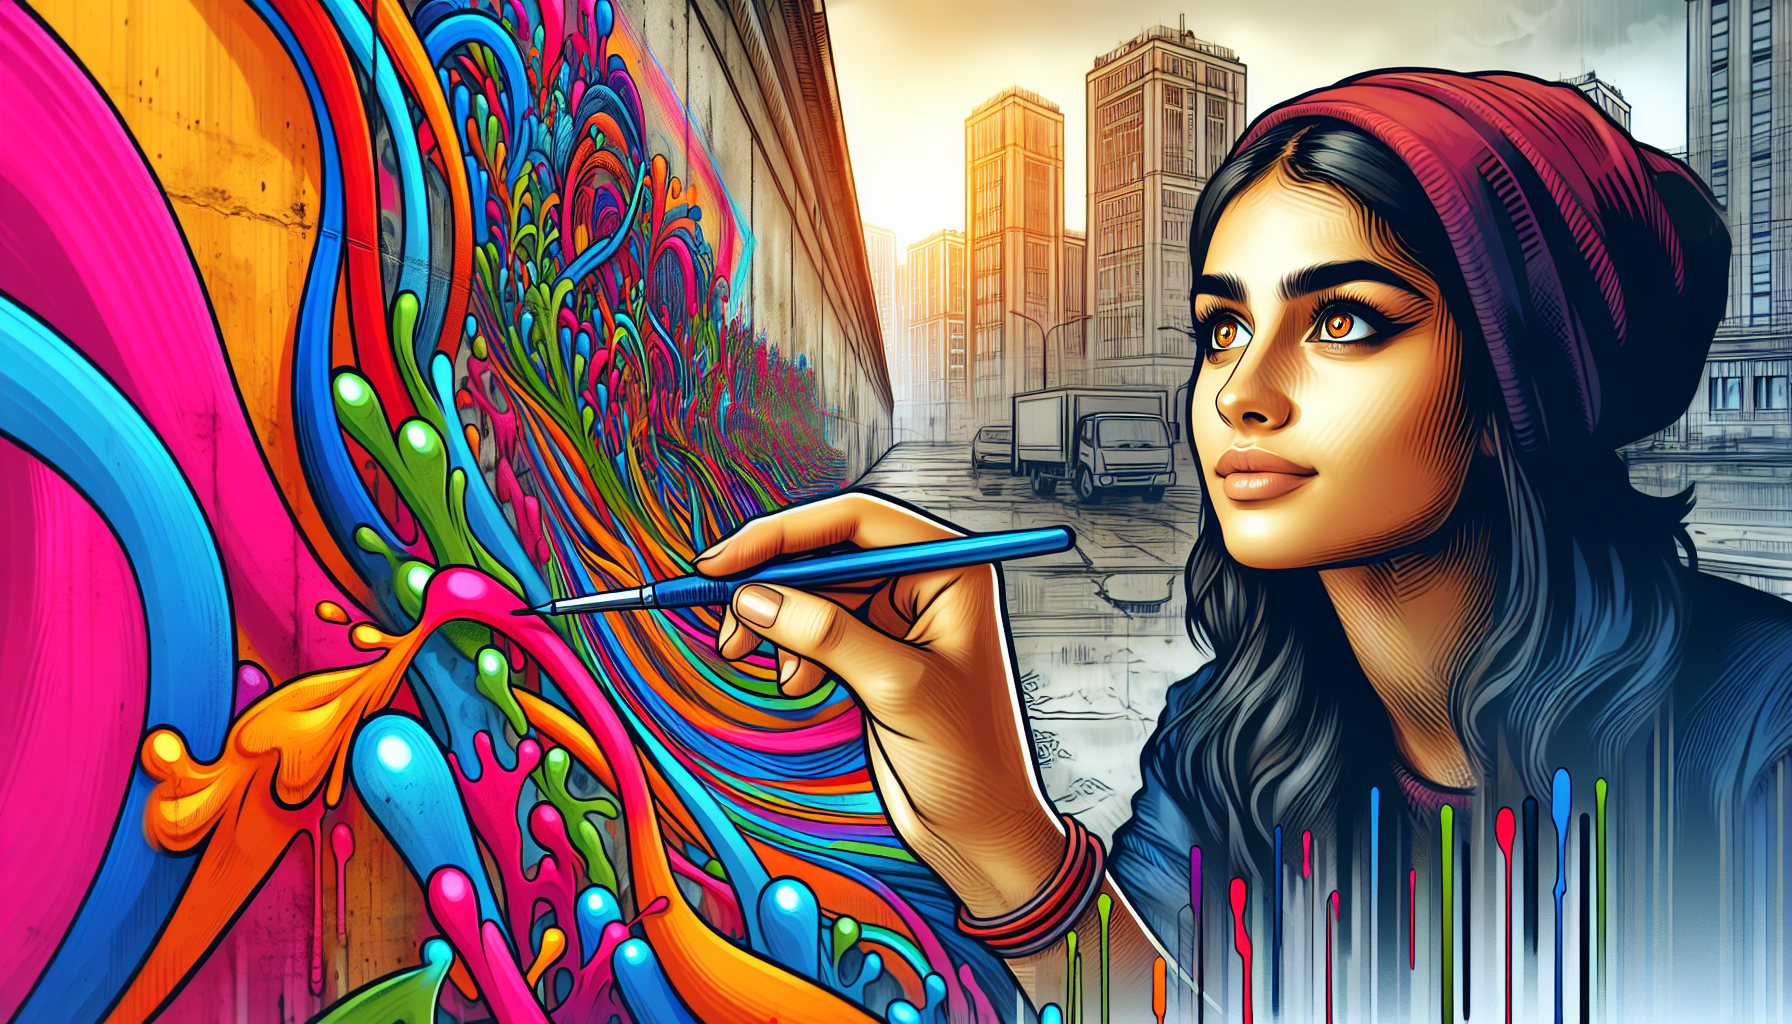 An inspiring portrait of a young artist with bright, expressive eyes, painting a large, vivid mural on an urban wall, the colors from the palette splashing outwards and transforming the gray buildings